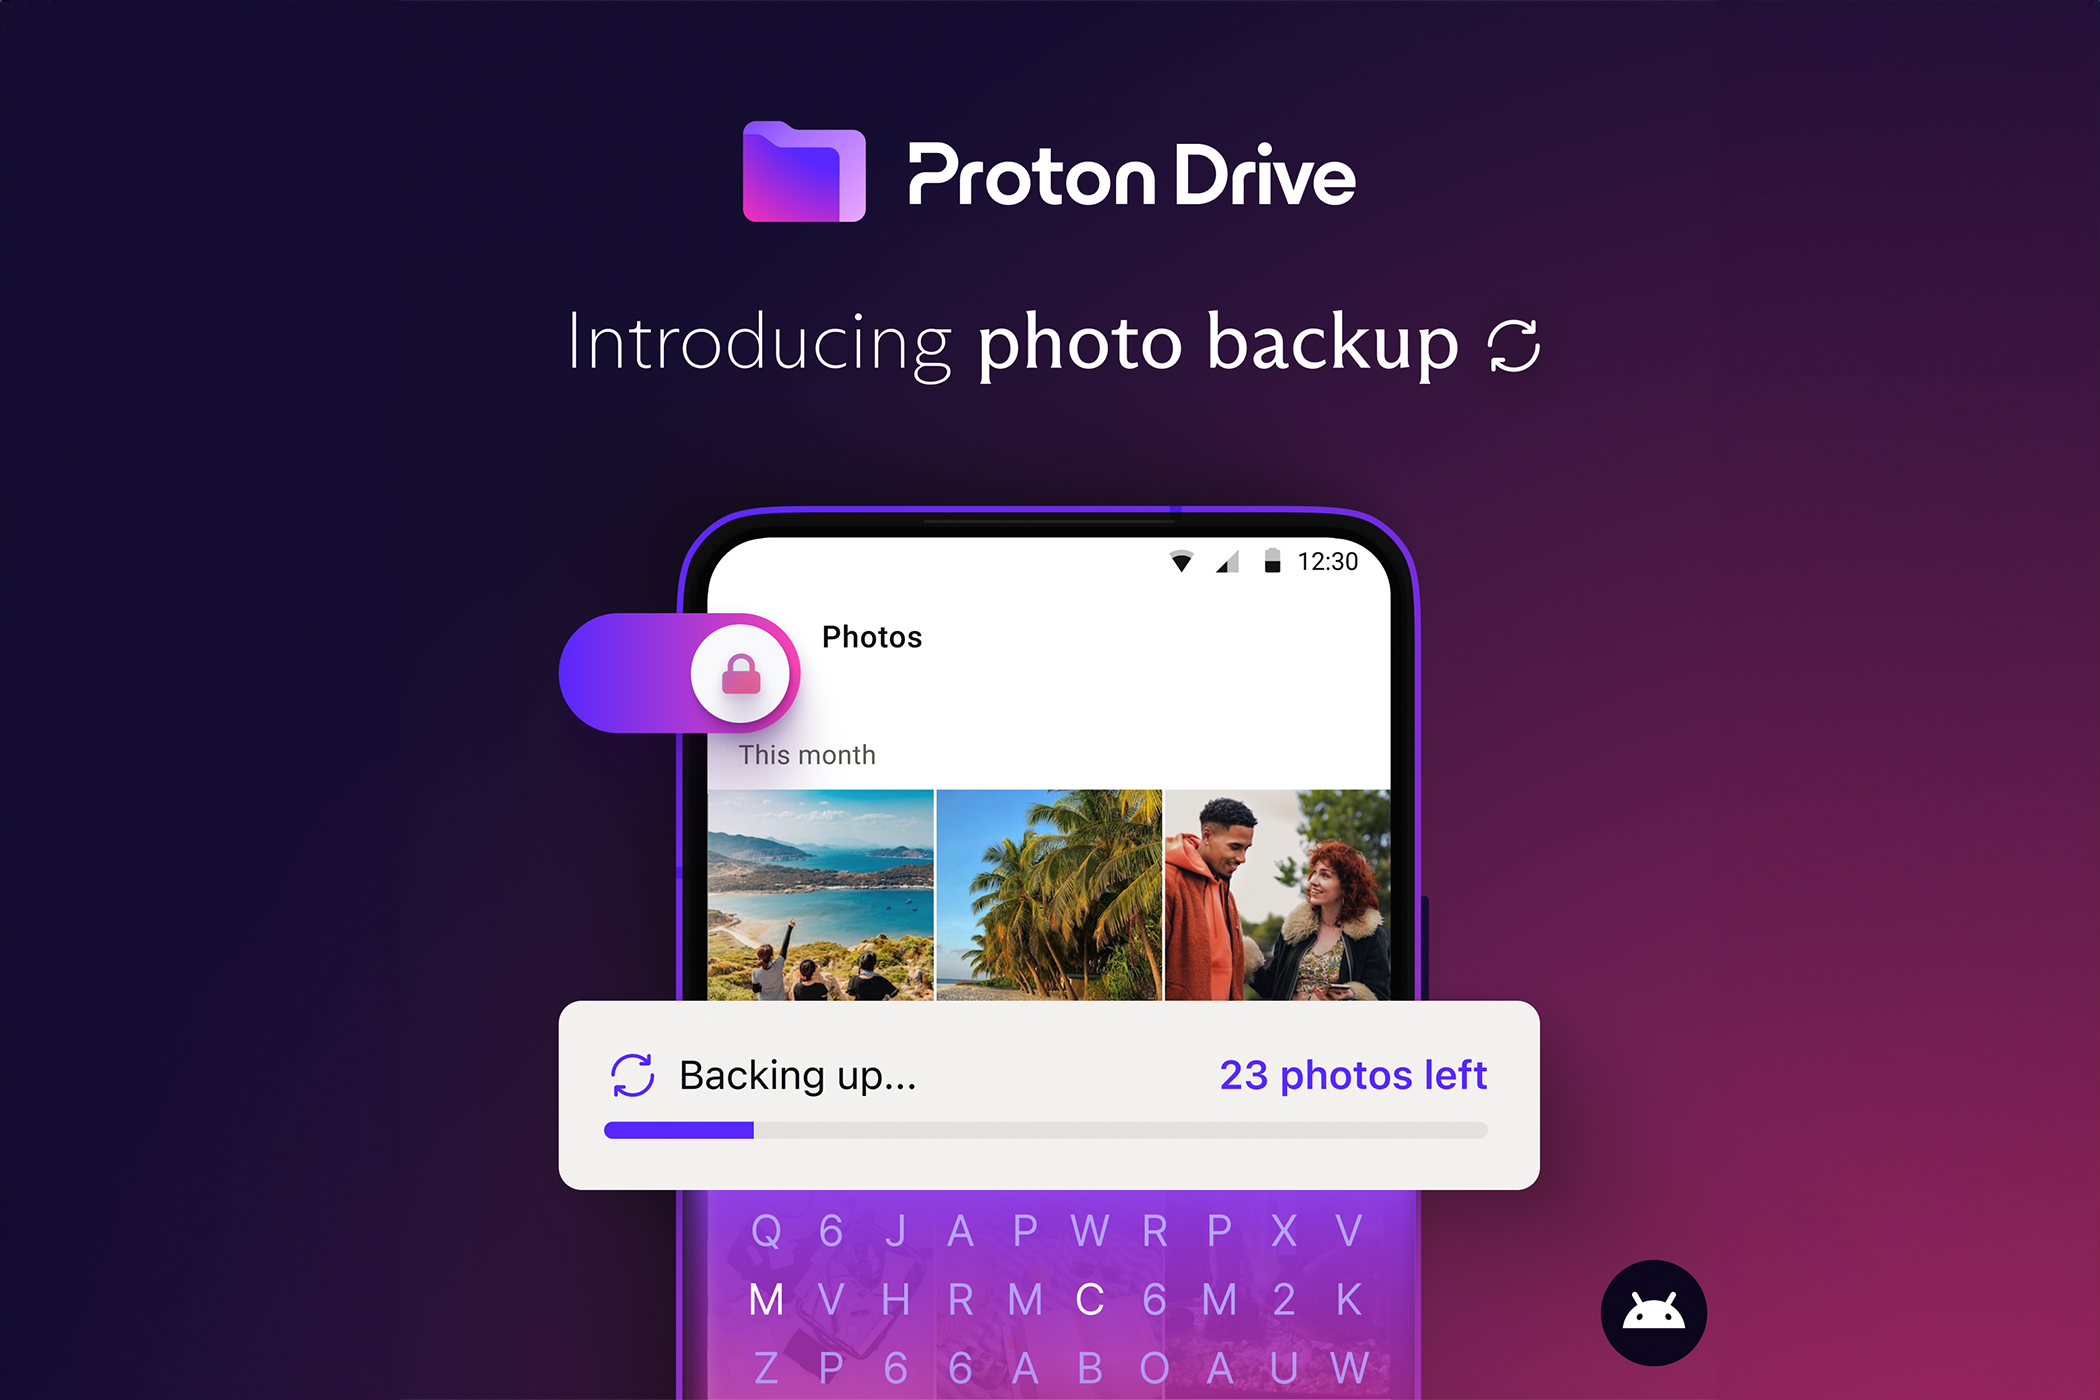 How to sign in to the Proton Drive Windows app